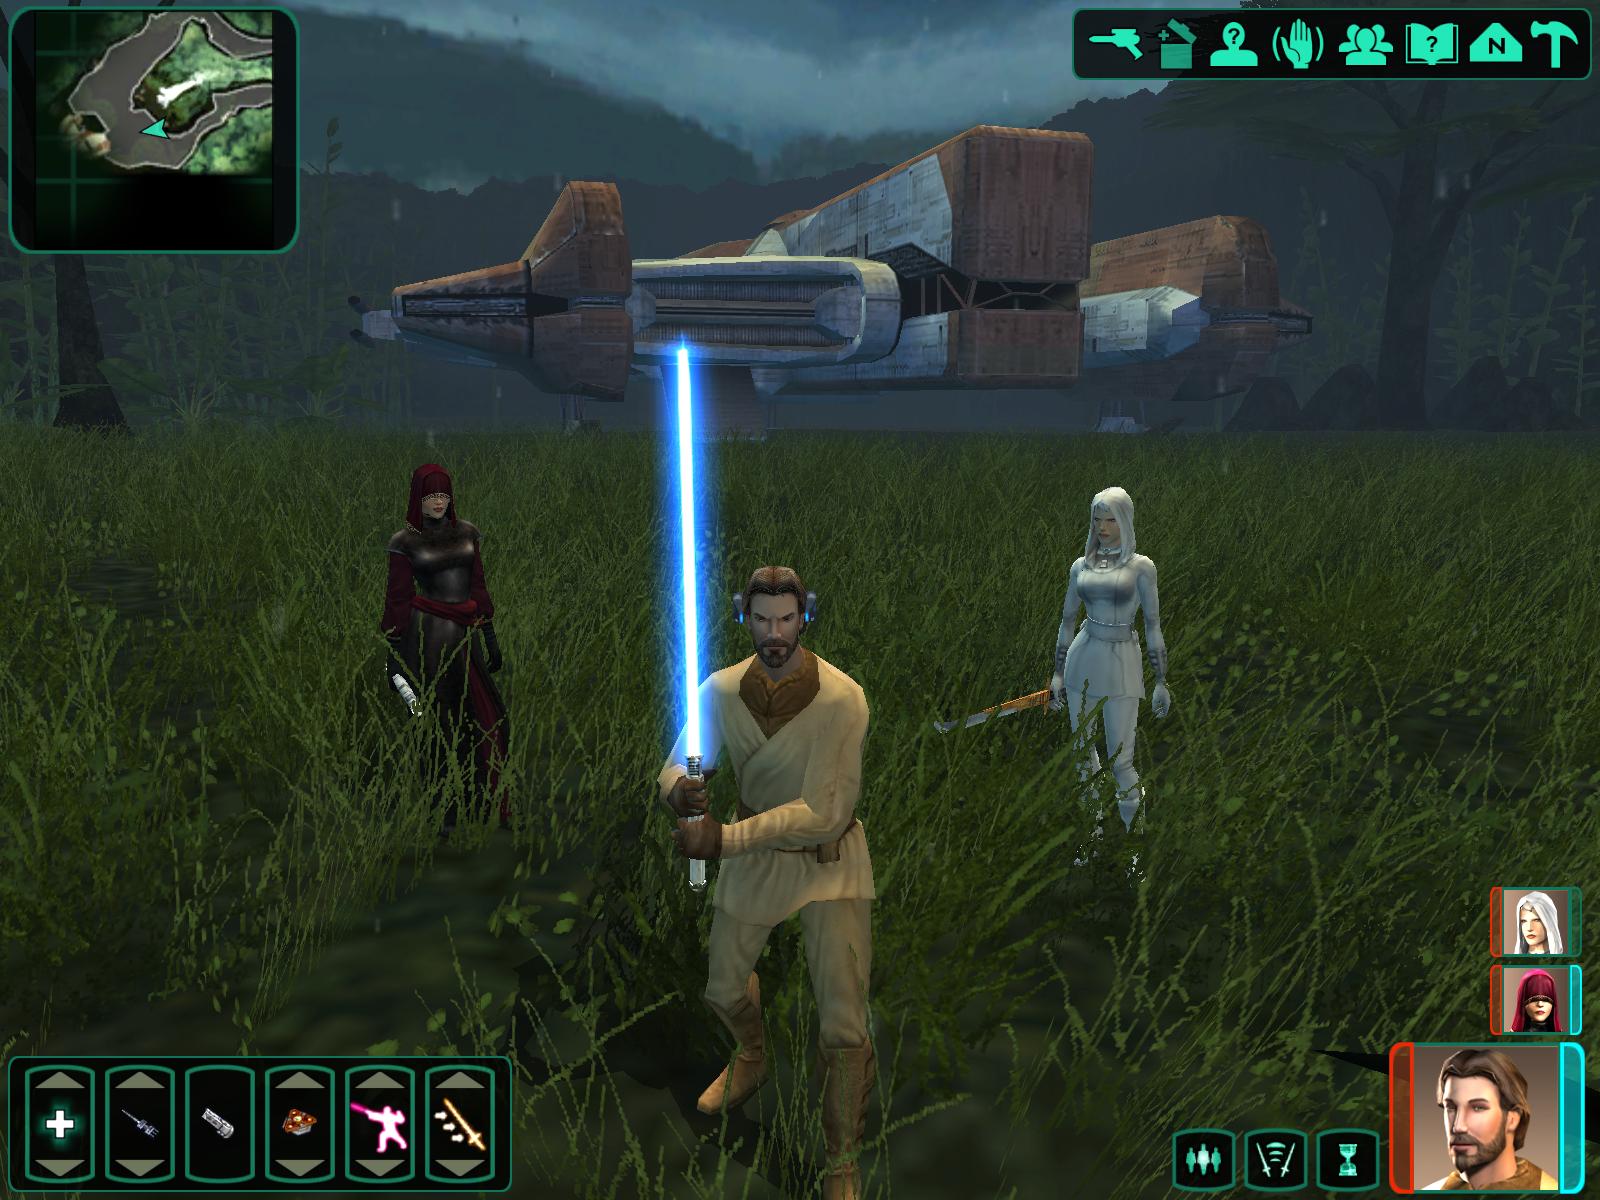 knights of the old republic 2 torrent gog.com